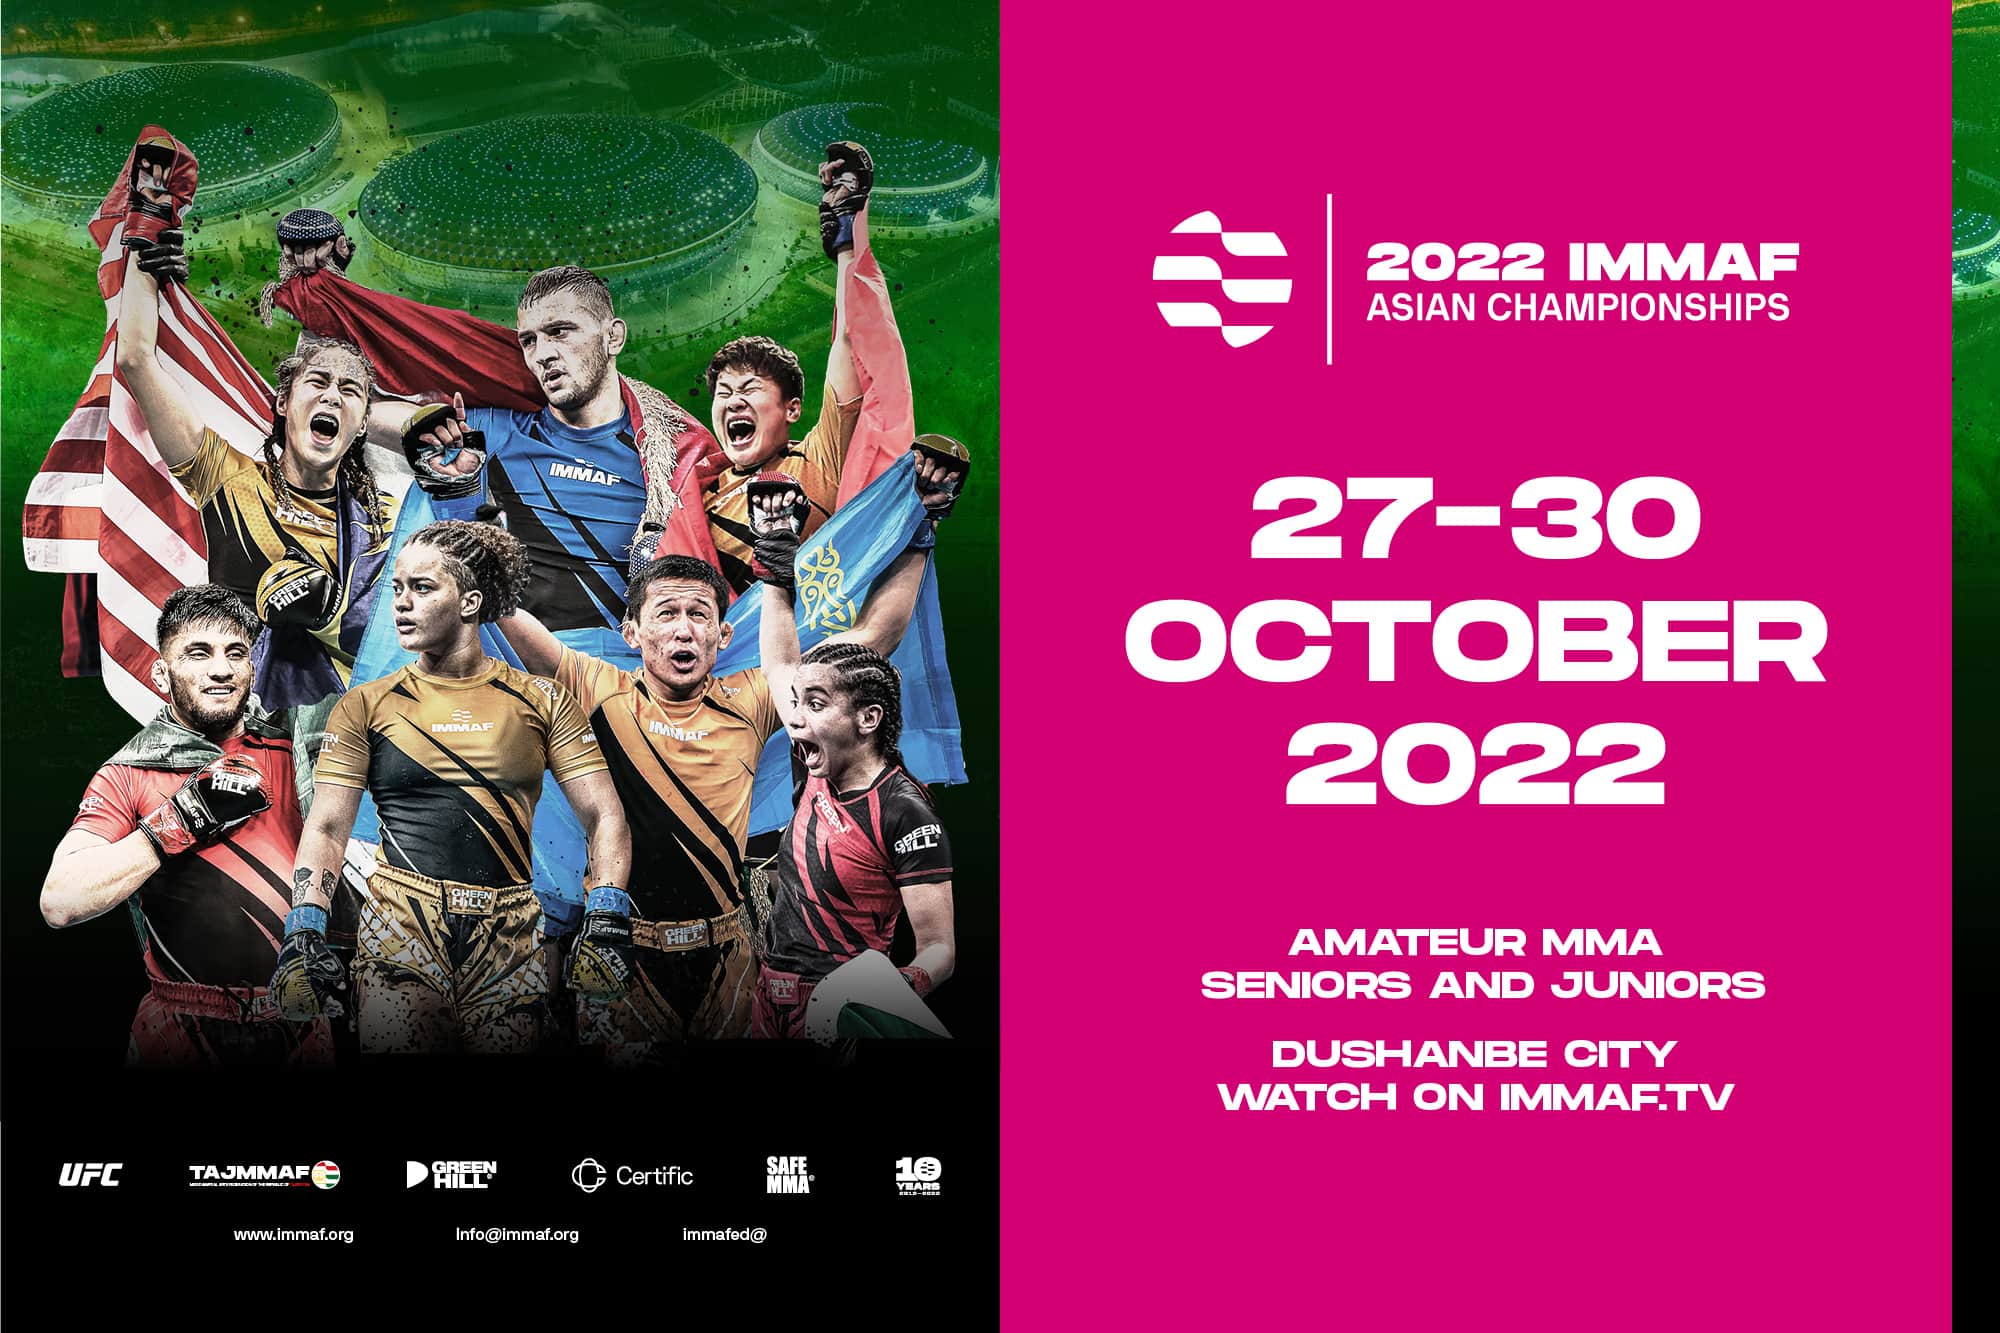 IMMAF announces Athletes and Teams for 2022 Asian Championships